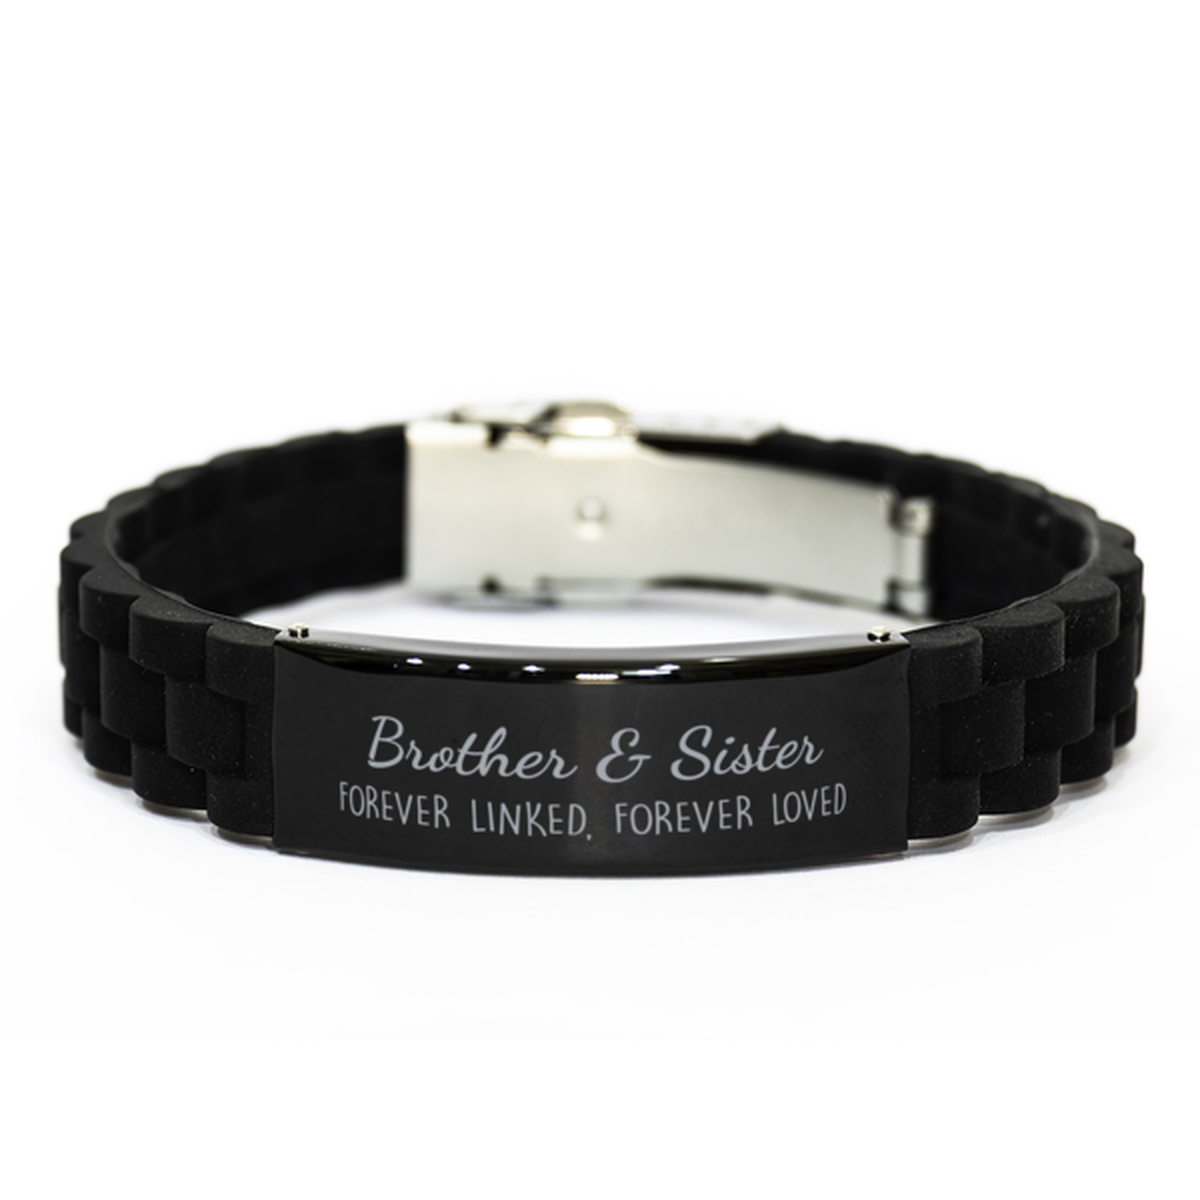 Brother and Sister Forever Linked Forever Loved Bracelet, Sister Brother Bracelet, Black Stainless Steel Silicone Bracelet, Birthday, Christmas.